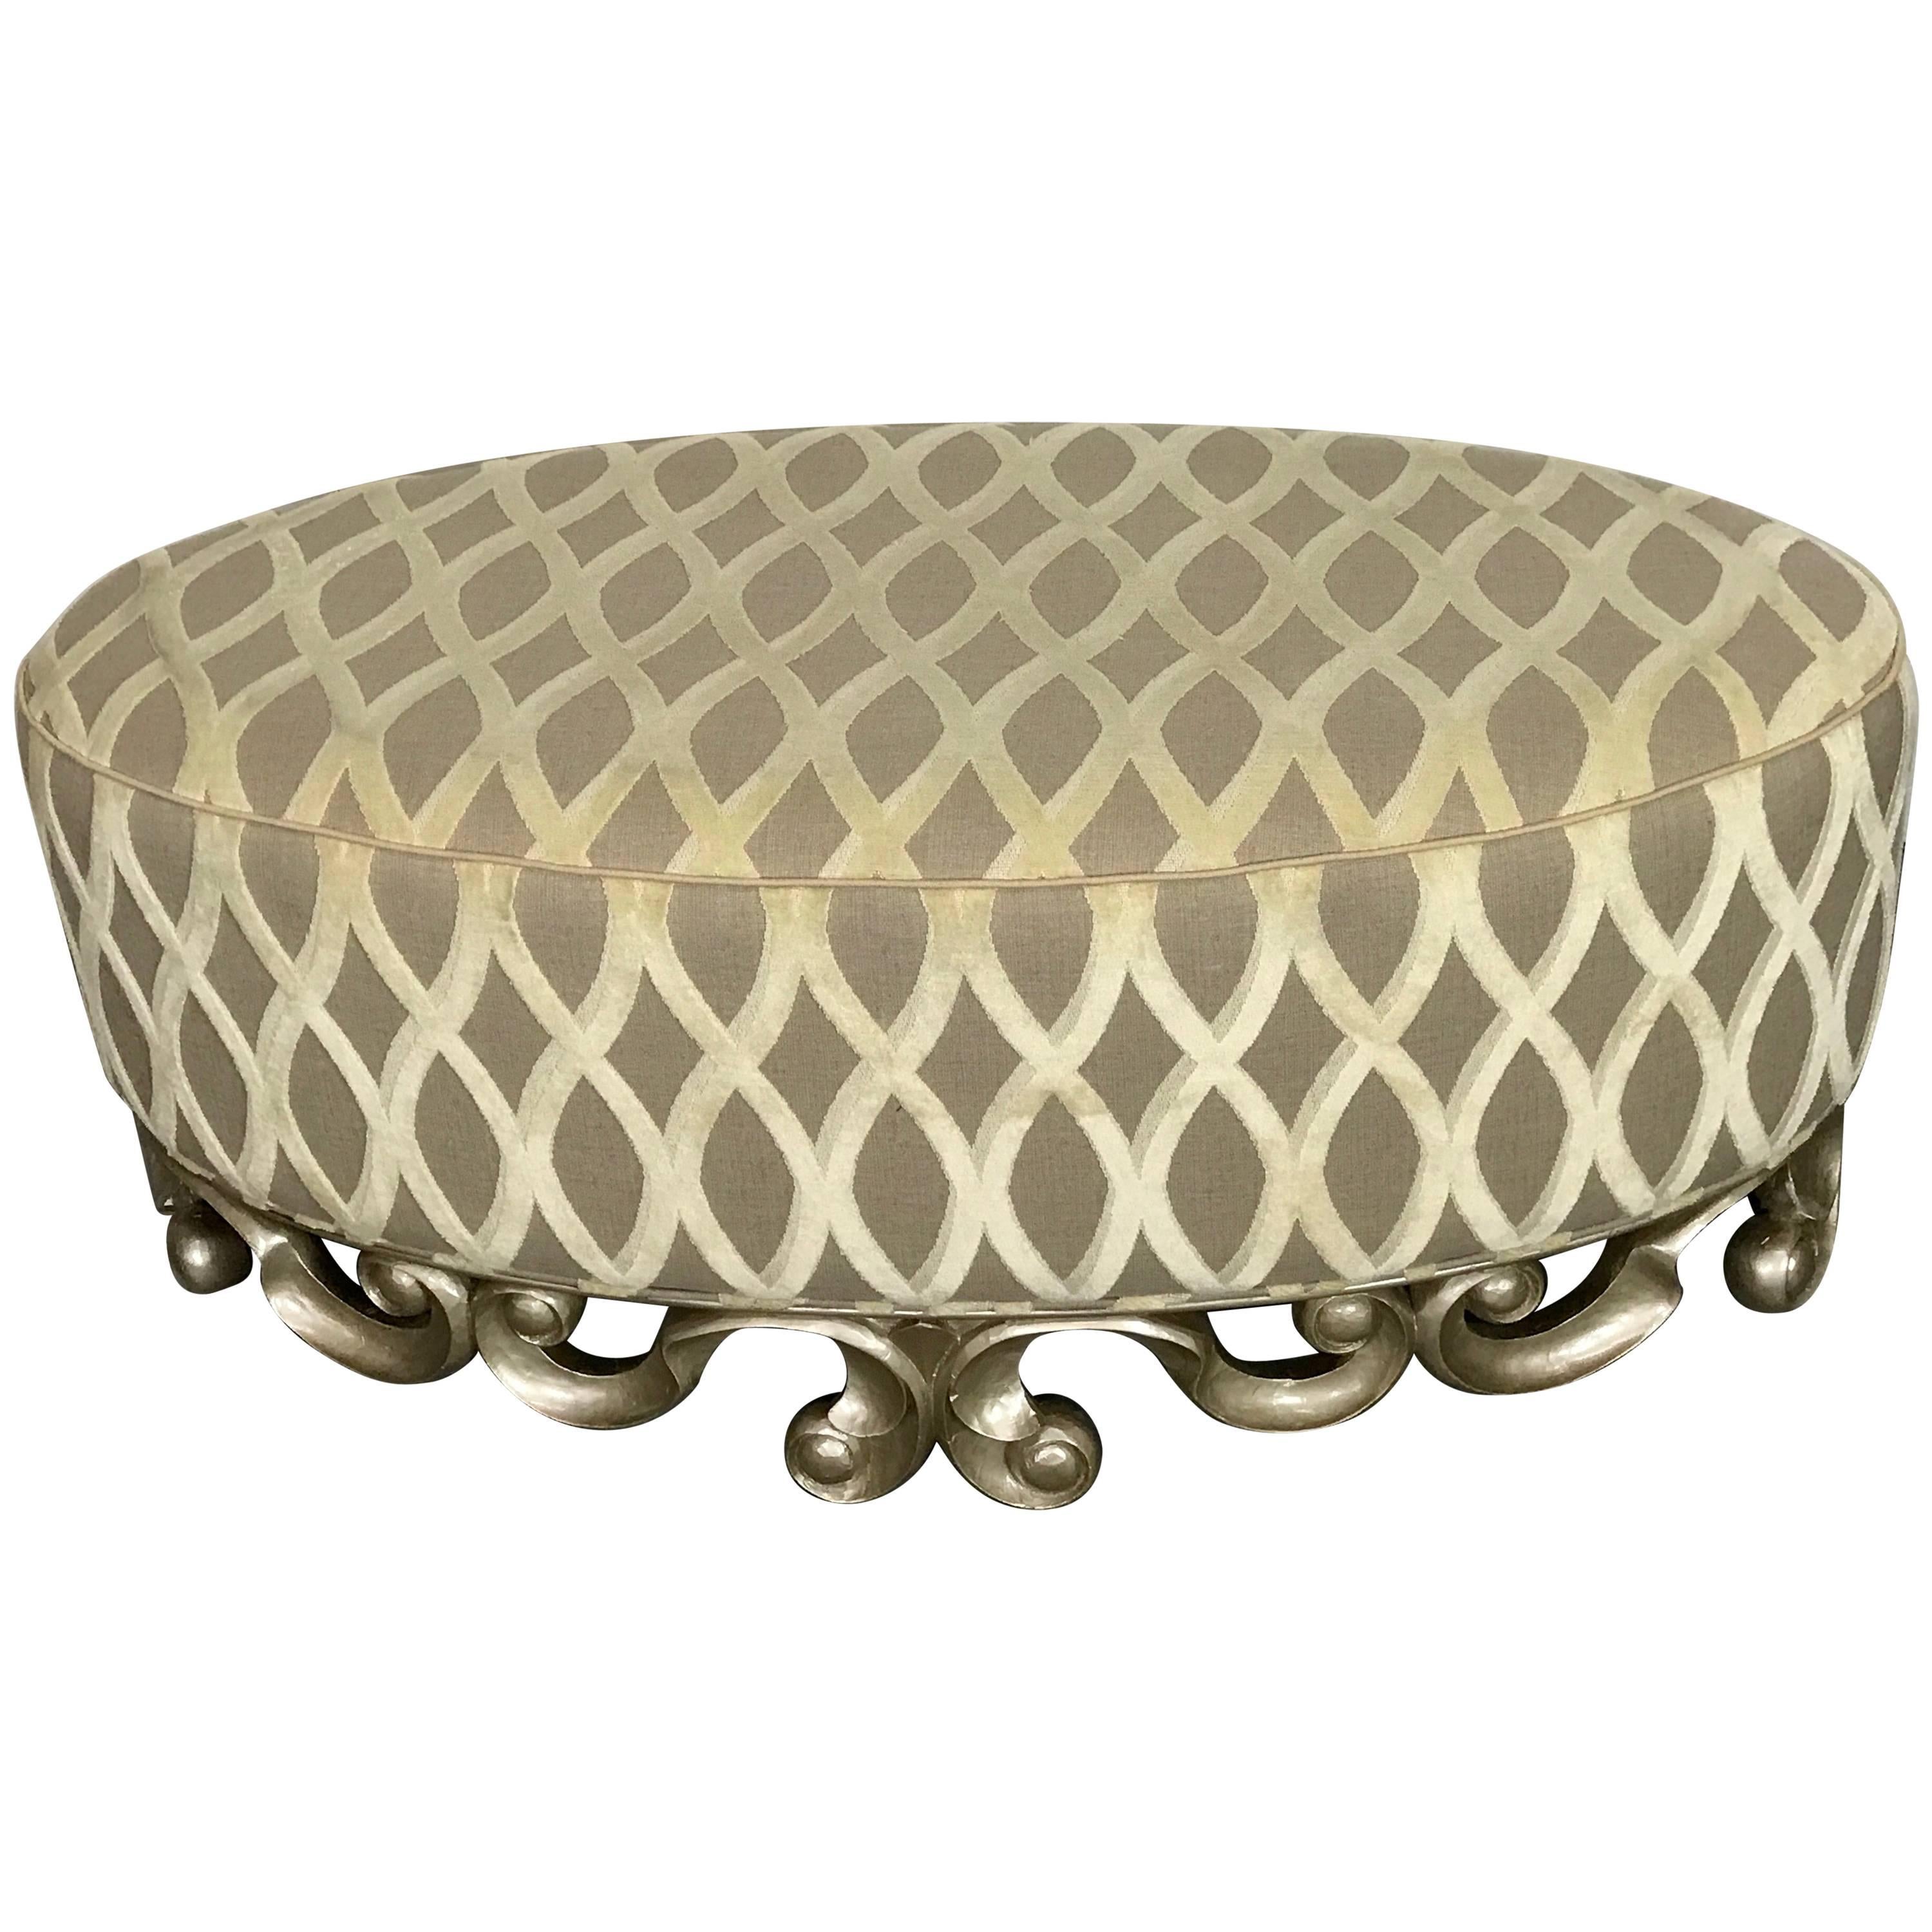 Christopher Guy Vuitton Cocktail Ottoman, in Italian Silver For Sale